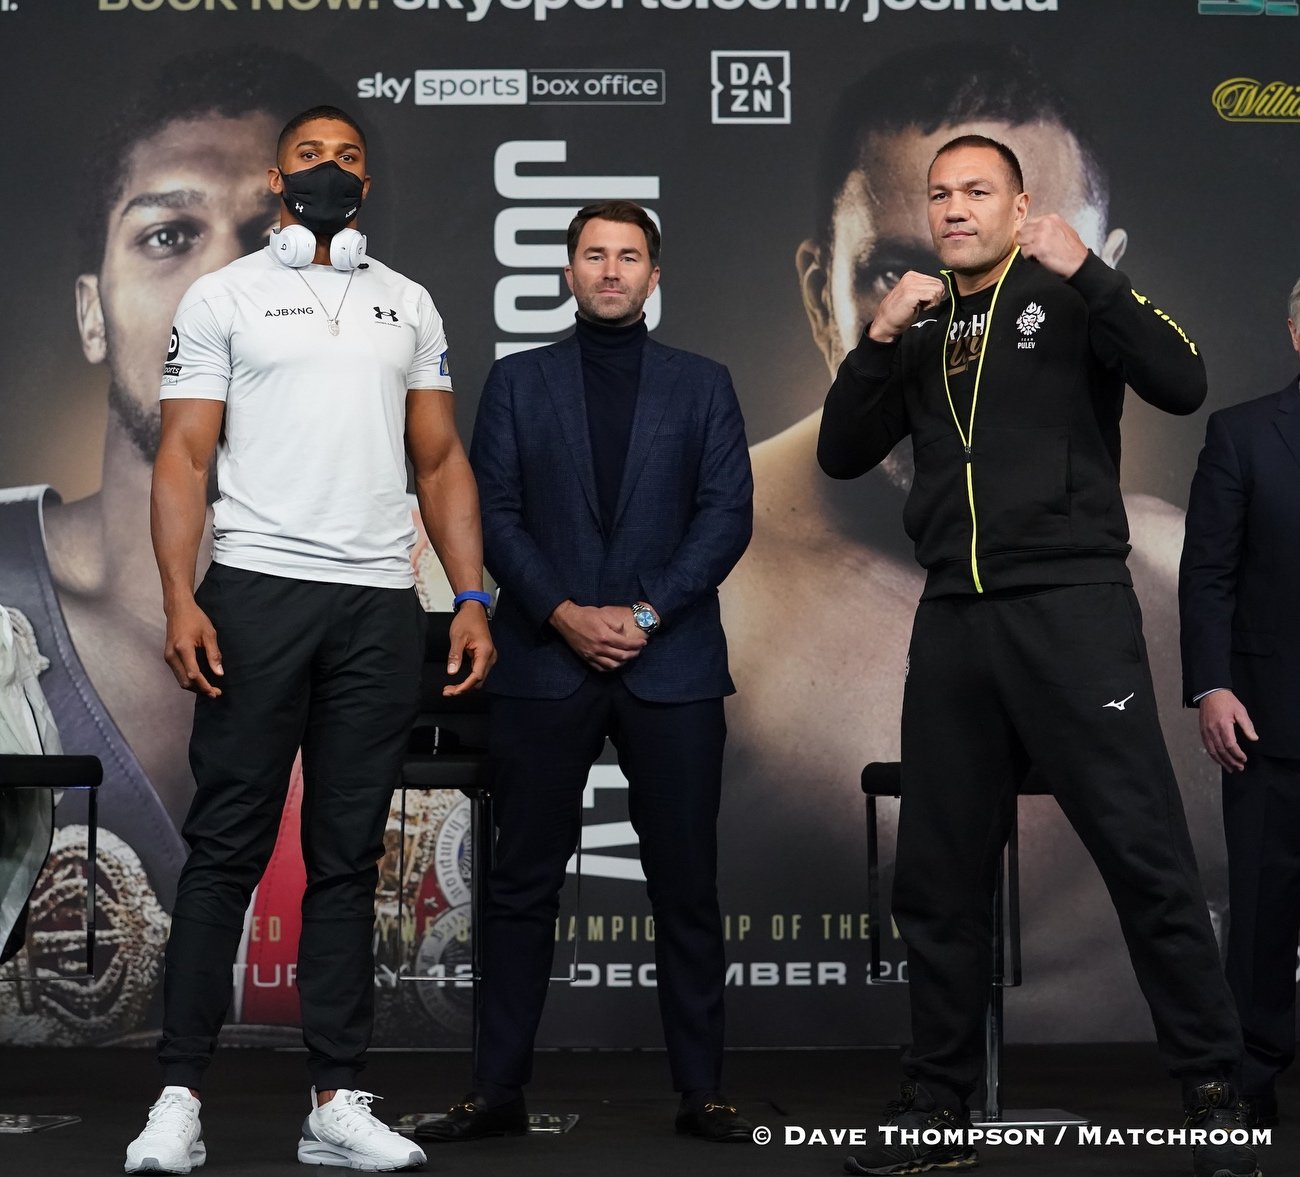 Image: Hearn expects WBO to allow Joshua to steer around Usyk to face Fury next